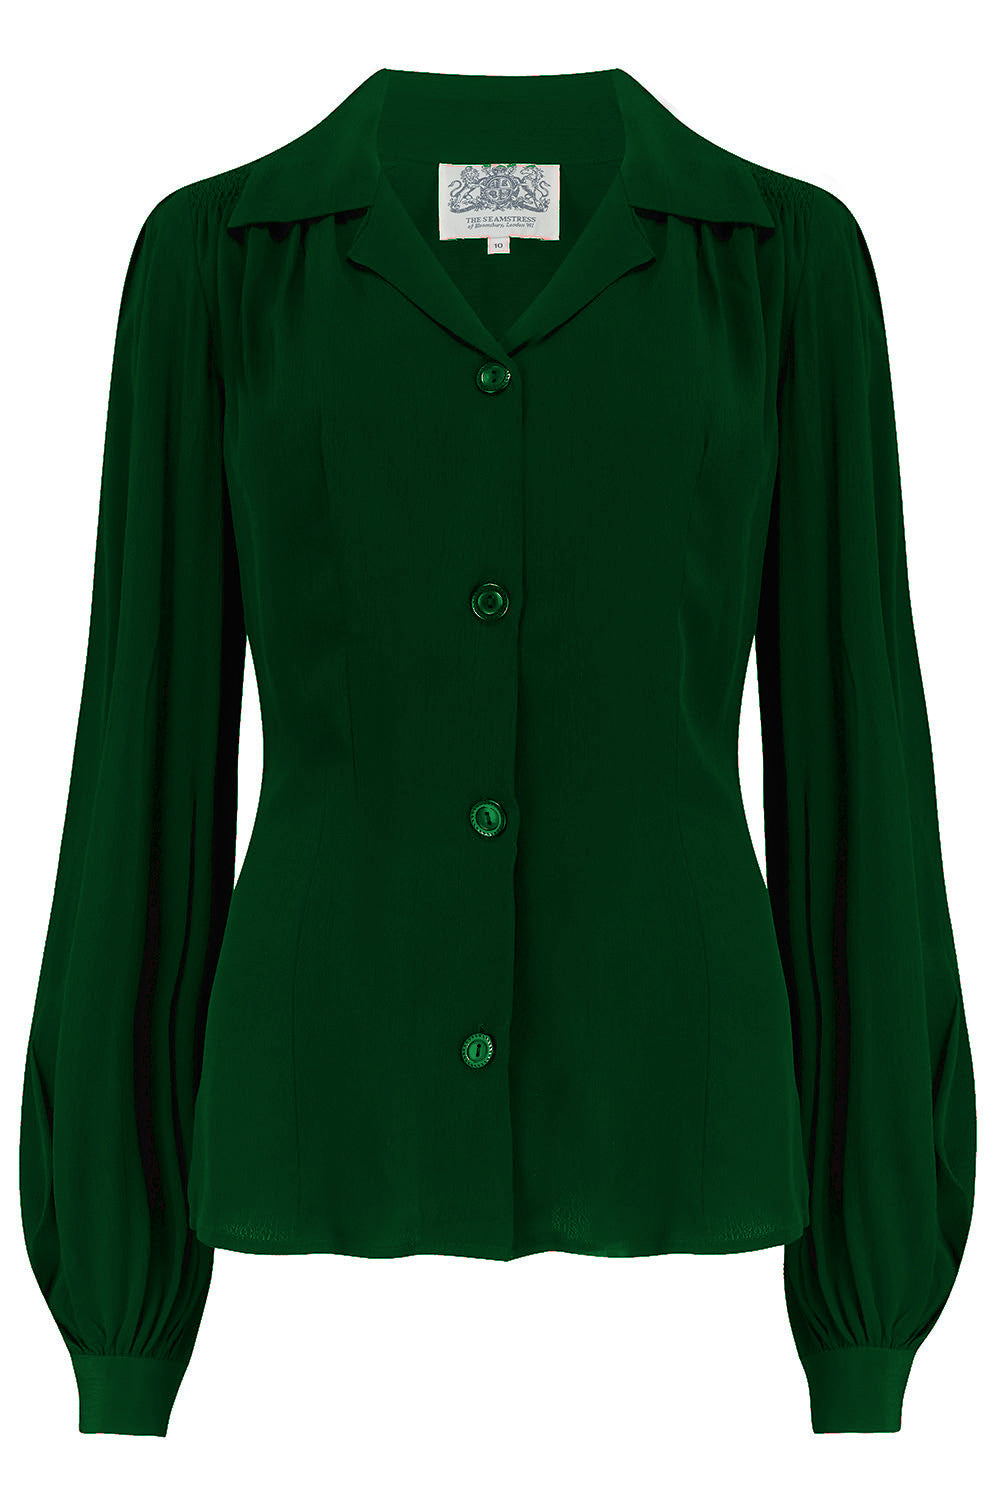 1940s Blouses, Tops, Shirts, Knitwear Poppy Long Sleeve Blouse in Green Authentic  Classic 1940s Vintage Style £49.00 AT vintagedancer.com